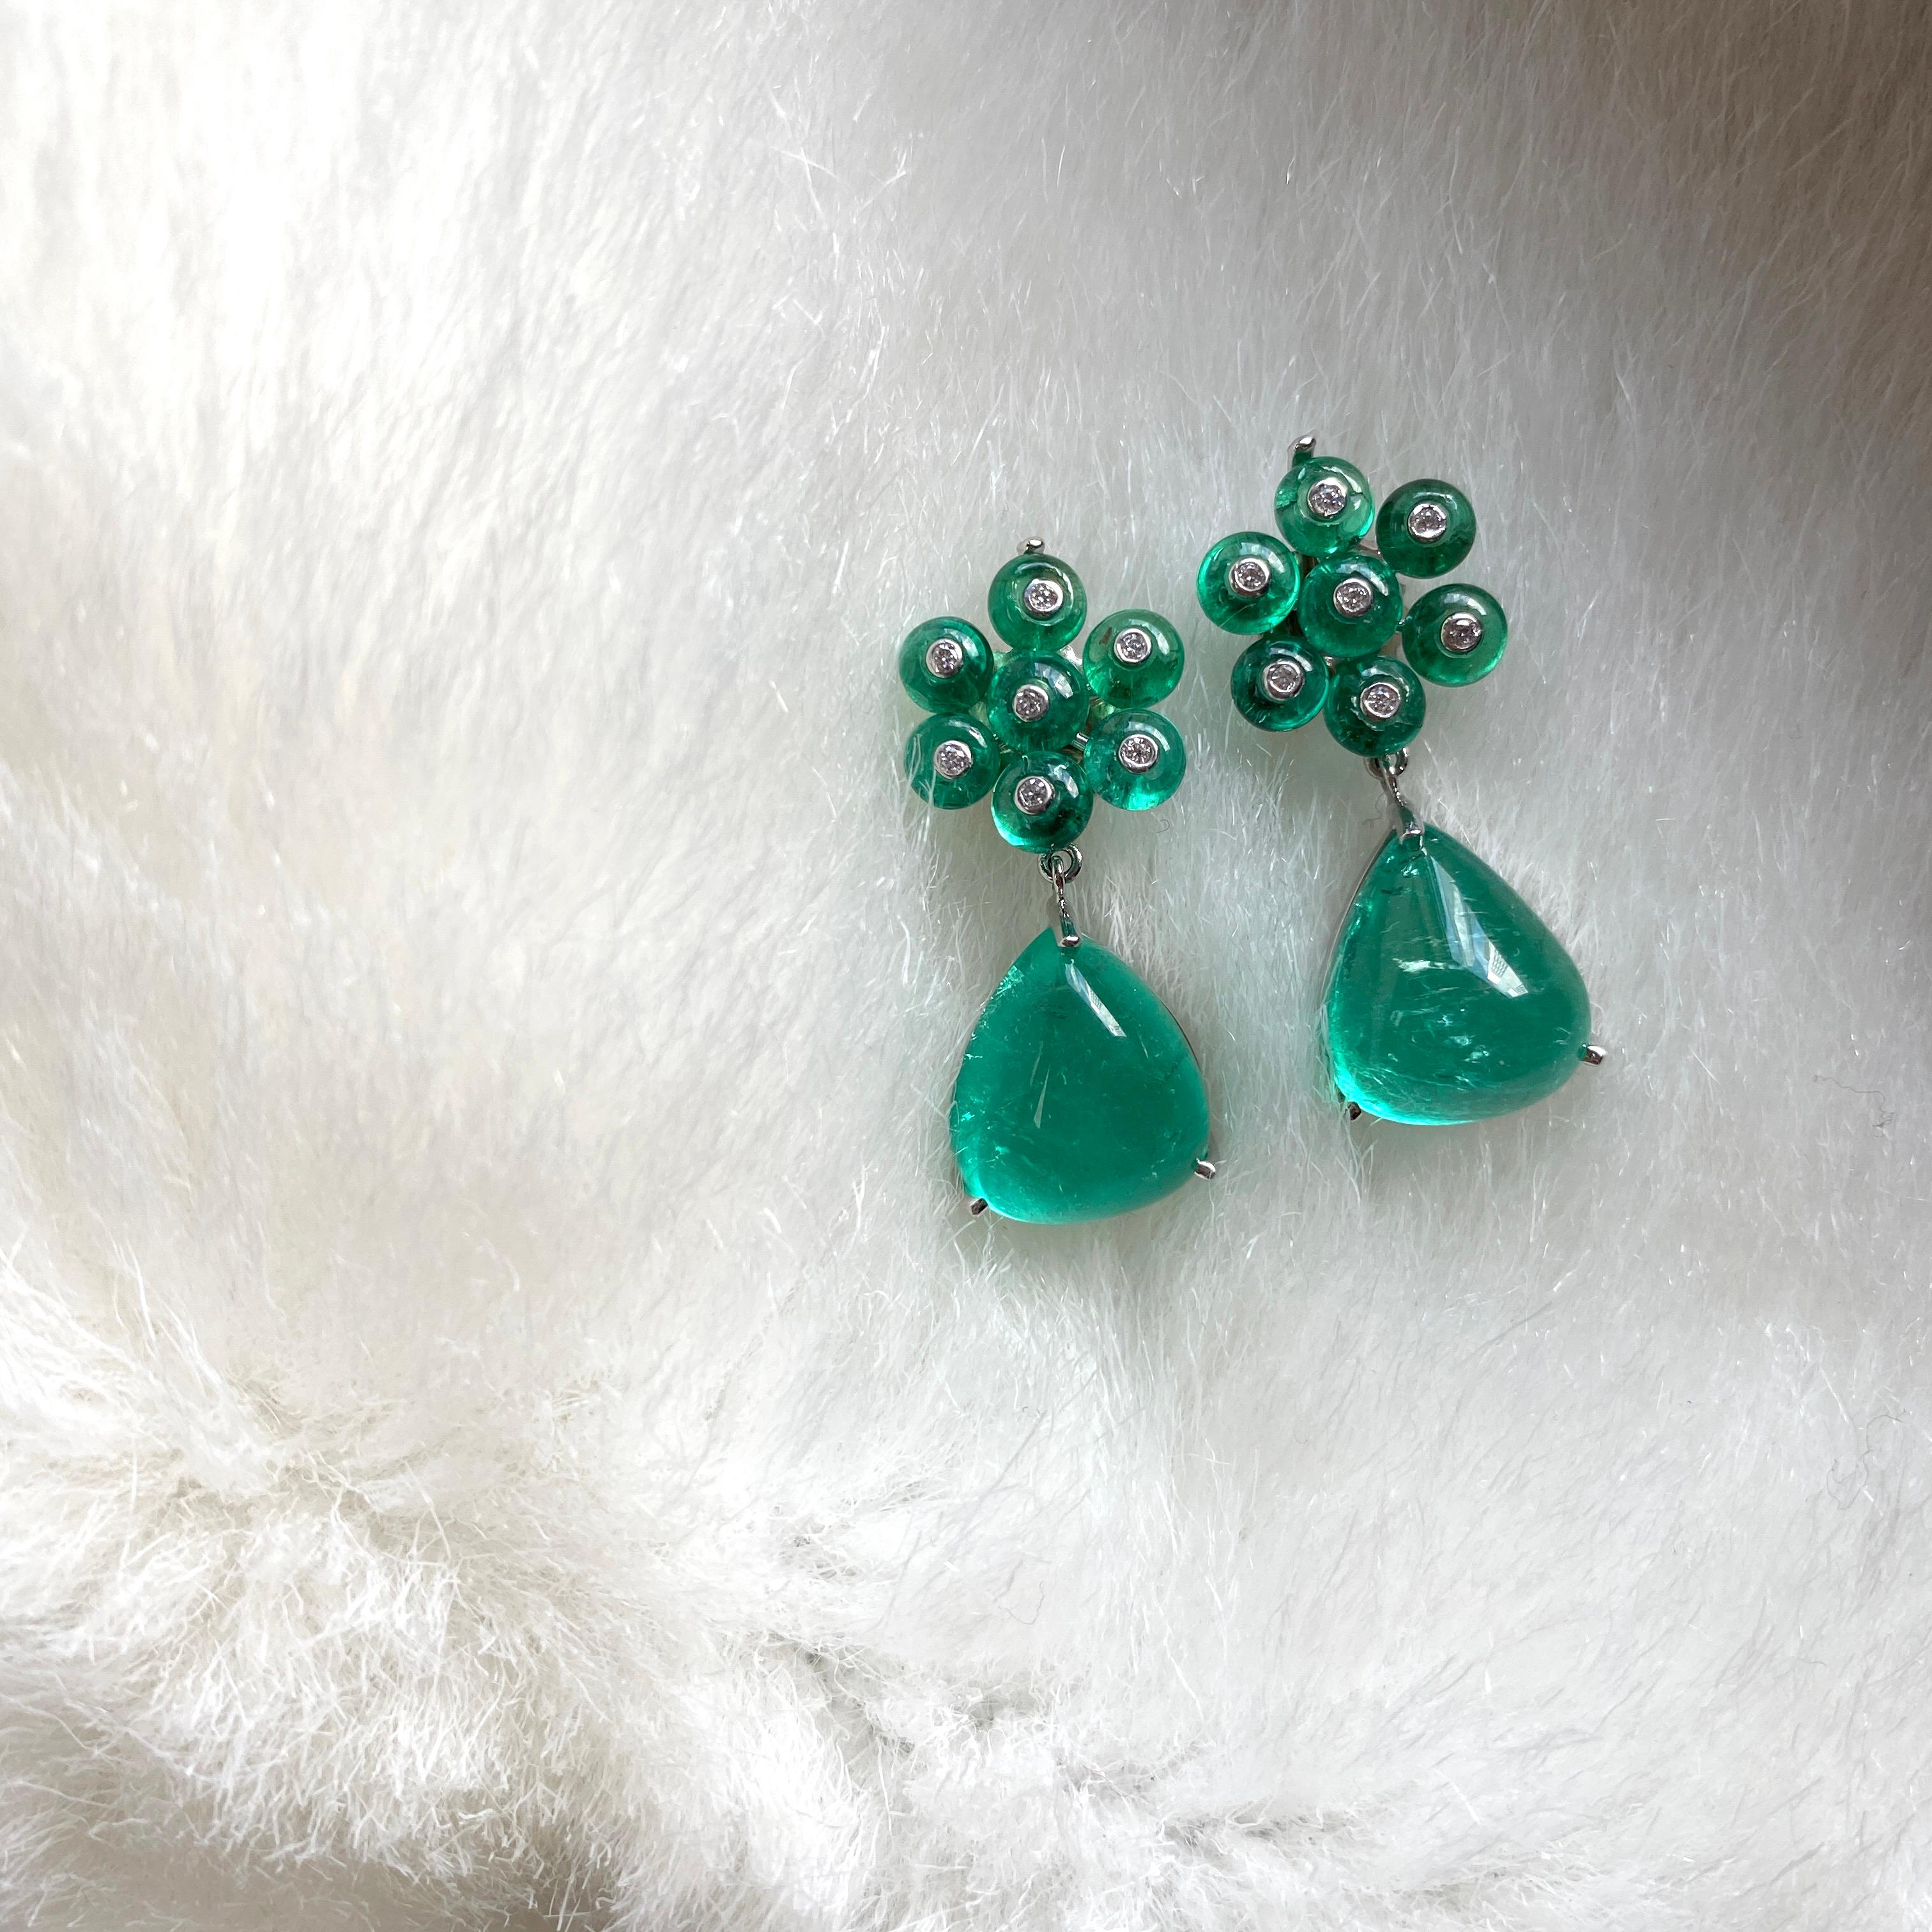 These Emerald Cab with Small Emerald Beads Flower Earrings in White Platinum are exquisite jewelry pieces from the 'G-One' Collection. These elegant earrings feature an emerald bead at their center, surrounded by delicate small emerald beads that